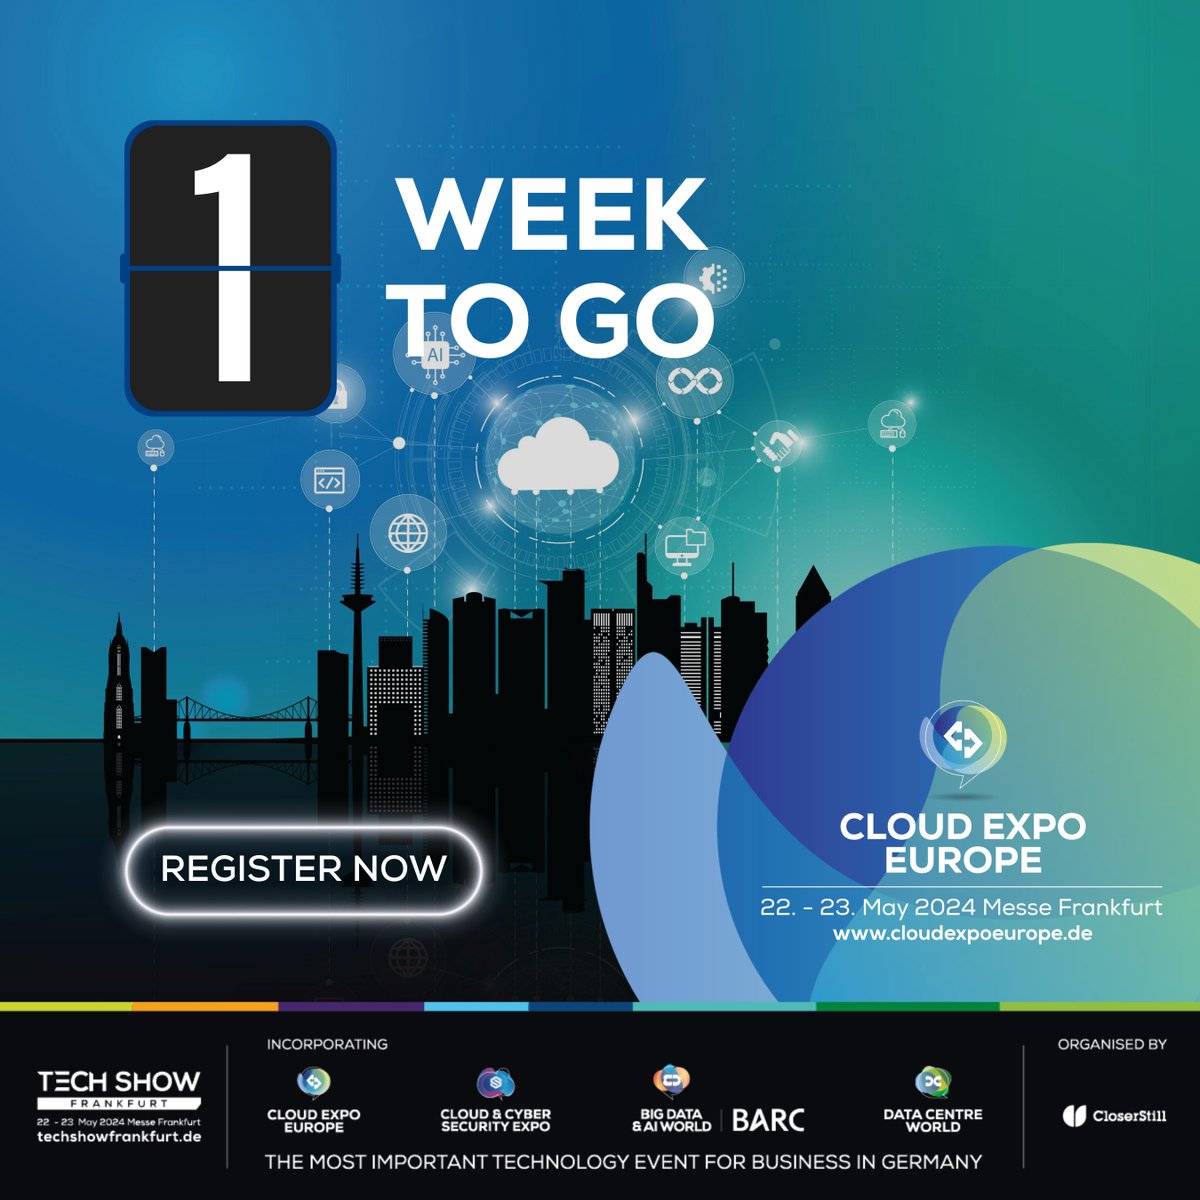 One Week Left until Cloud Expo Europe Frankfurt!

🌐 When: May 22-23
📍 Where: Messe Frankfurt, Germany

Register here: bit.ly/3QLQnoW
Plan your travel: bit.ly/3UCOFaB

#CloudExpoEurope #TechEvent #CEEF24